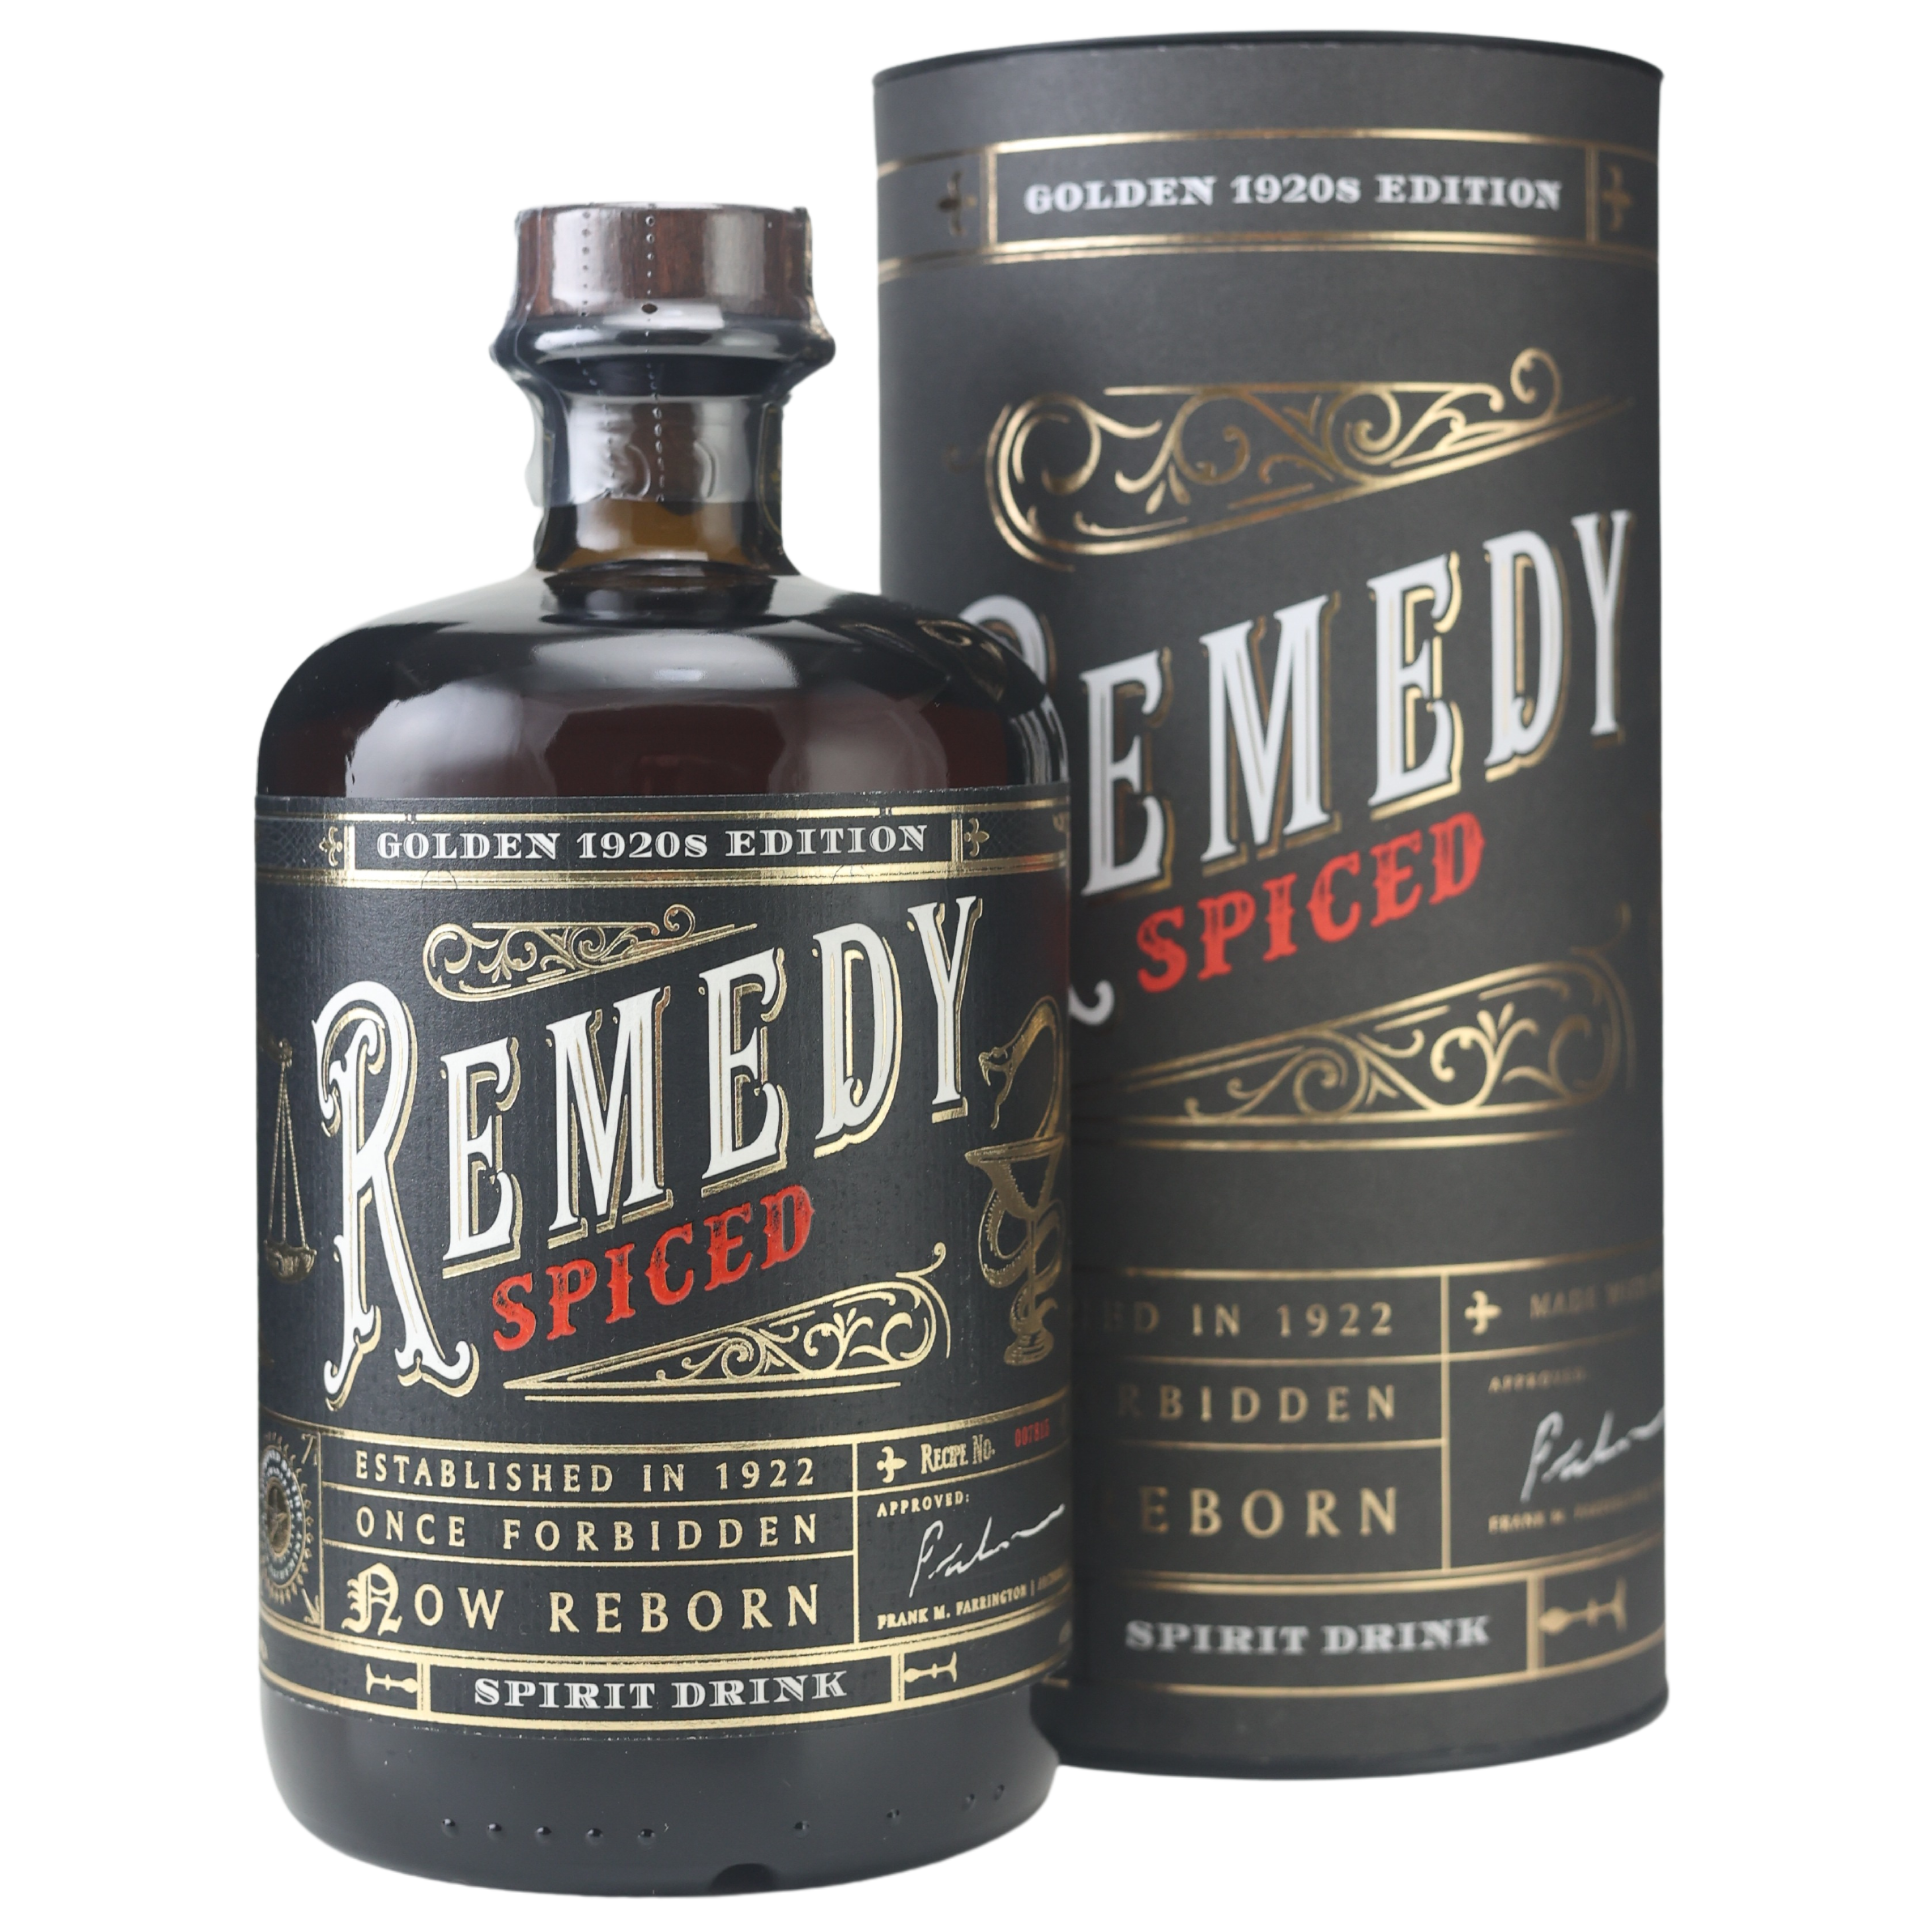 Remedy Spiced Golden 20´s Edition (Rum Basis) 41,5% 0,7l